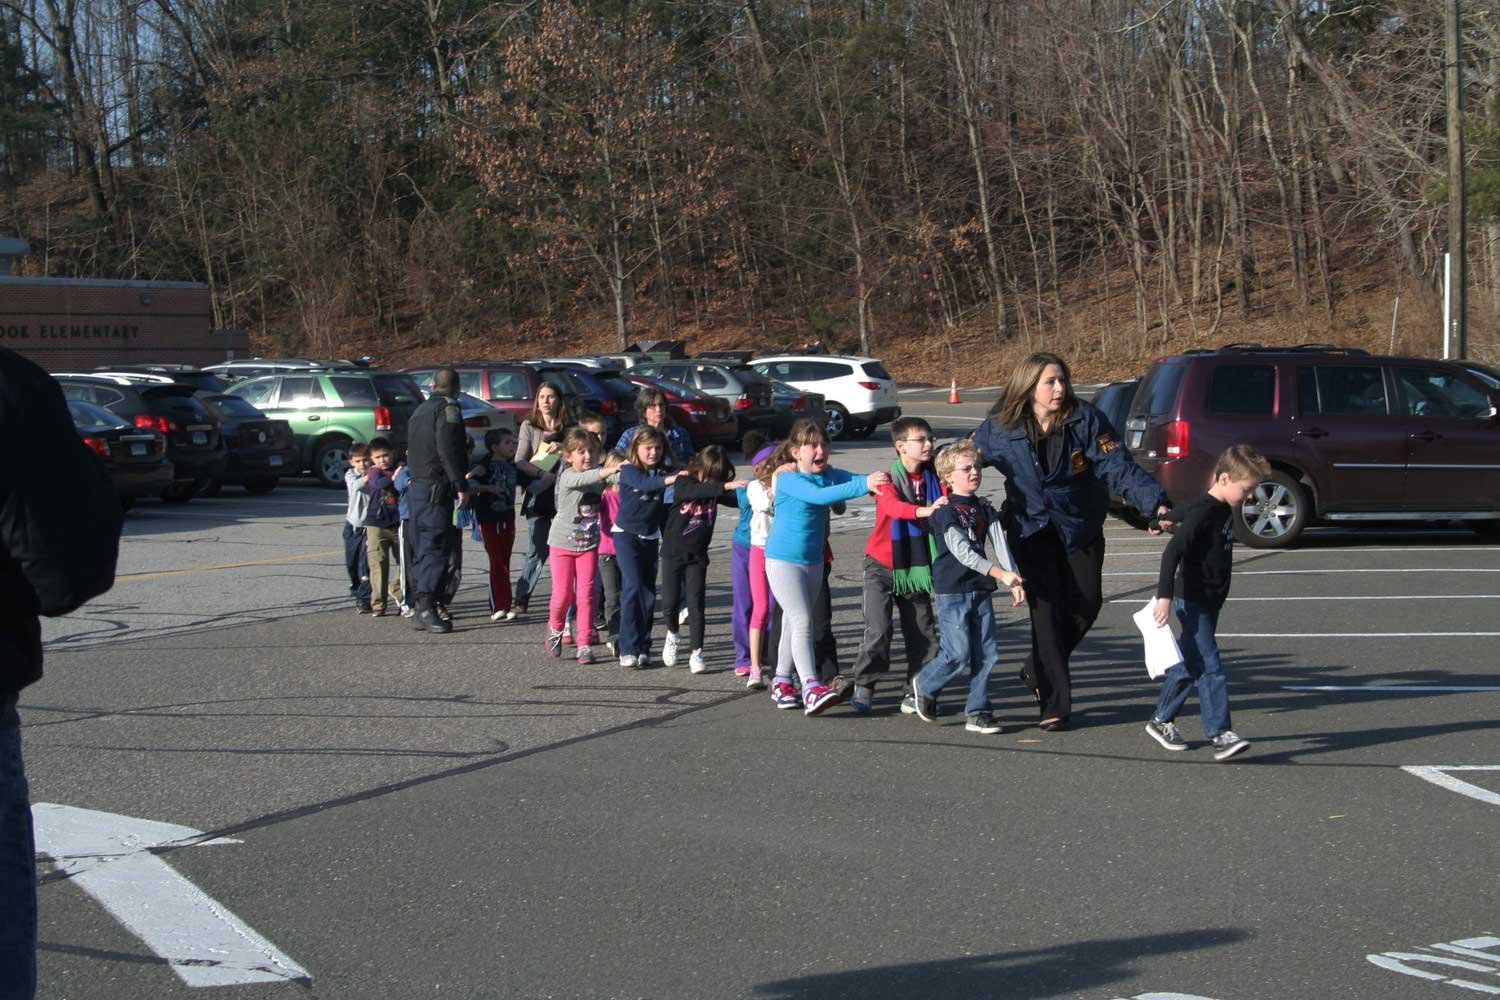 The Story Behind the Iconic Photograph from Sandy Hook | Time.com